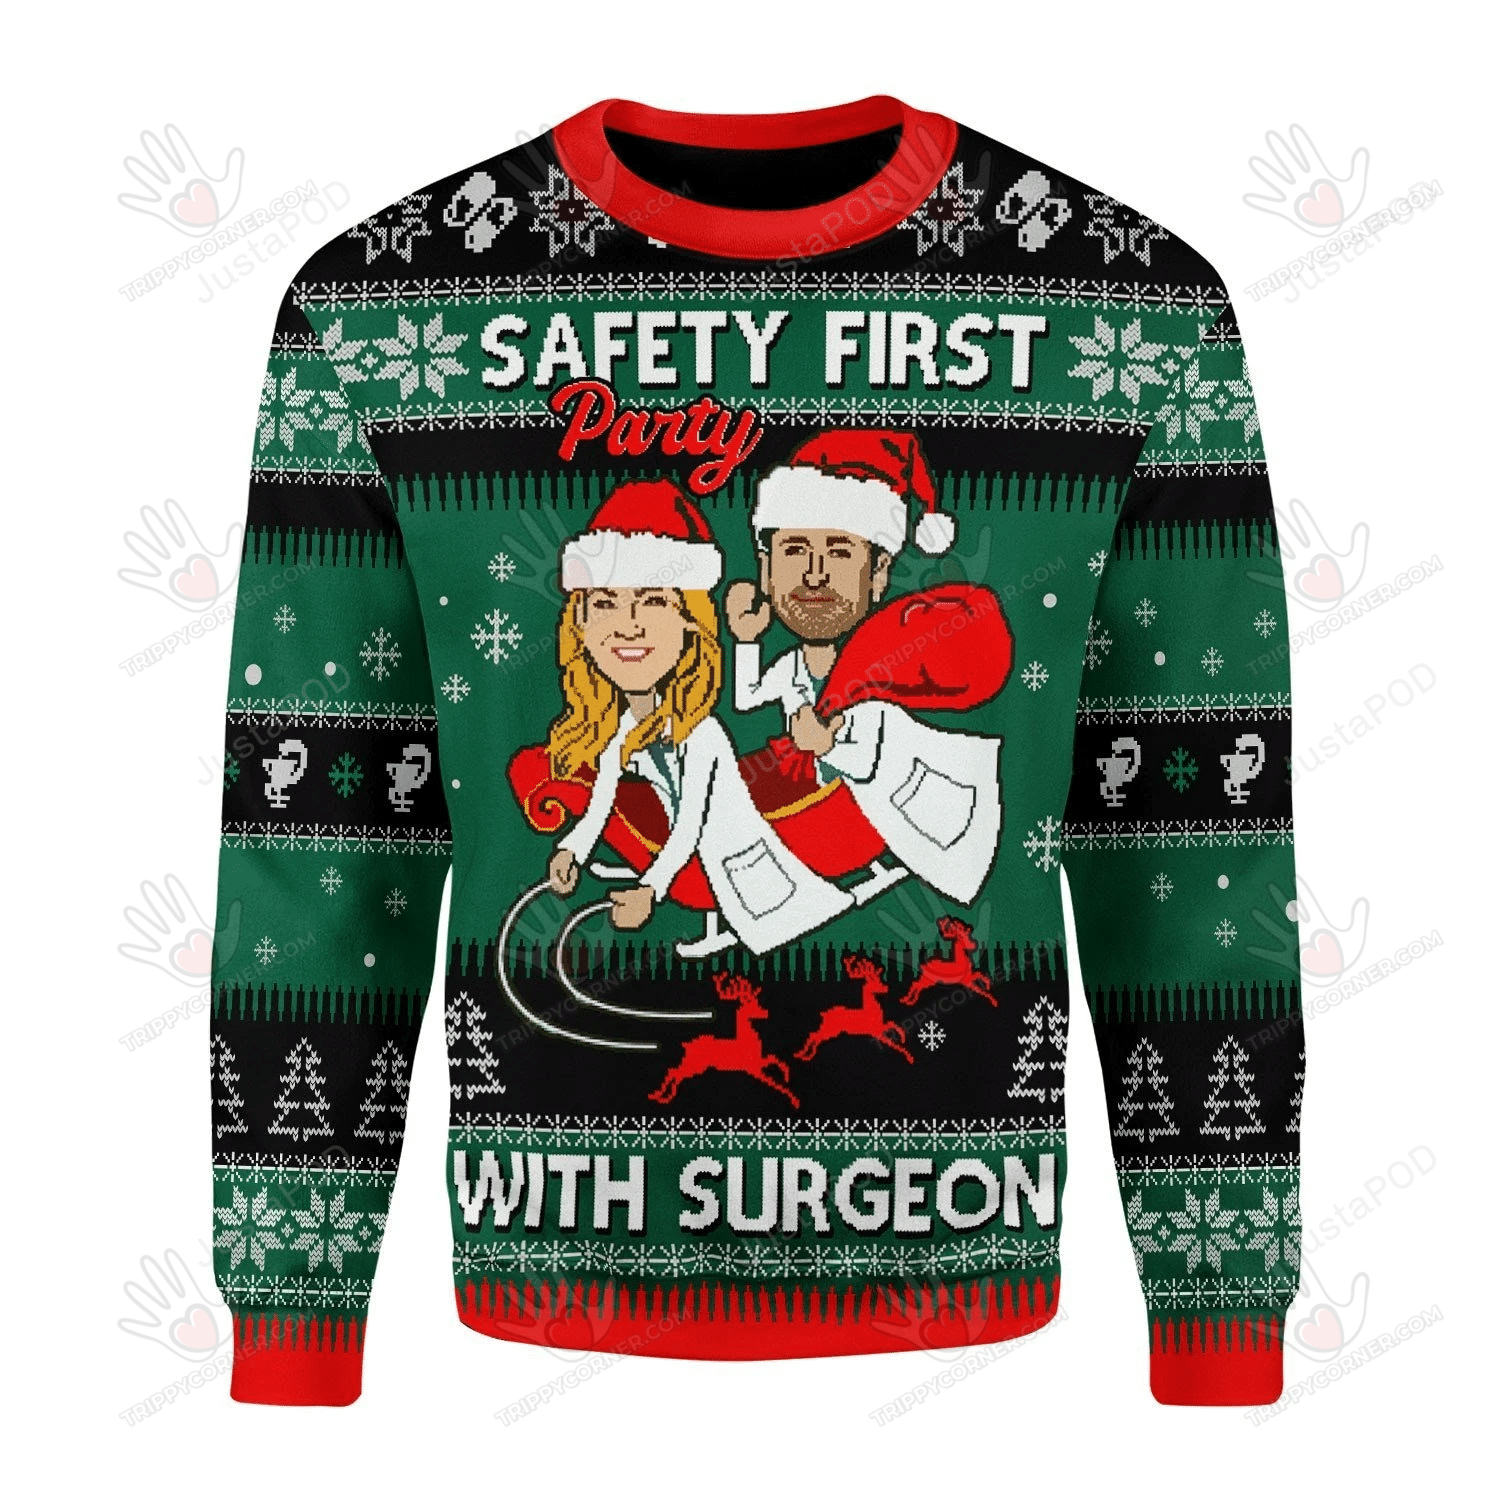 Safety First Party With Surgeon Greys Anatomy Ugly Christmas Sweater, Ugly Sweater Christmas Gift